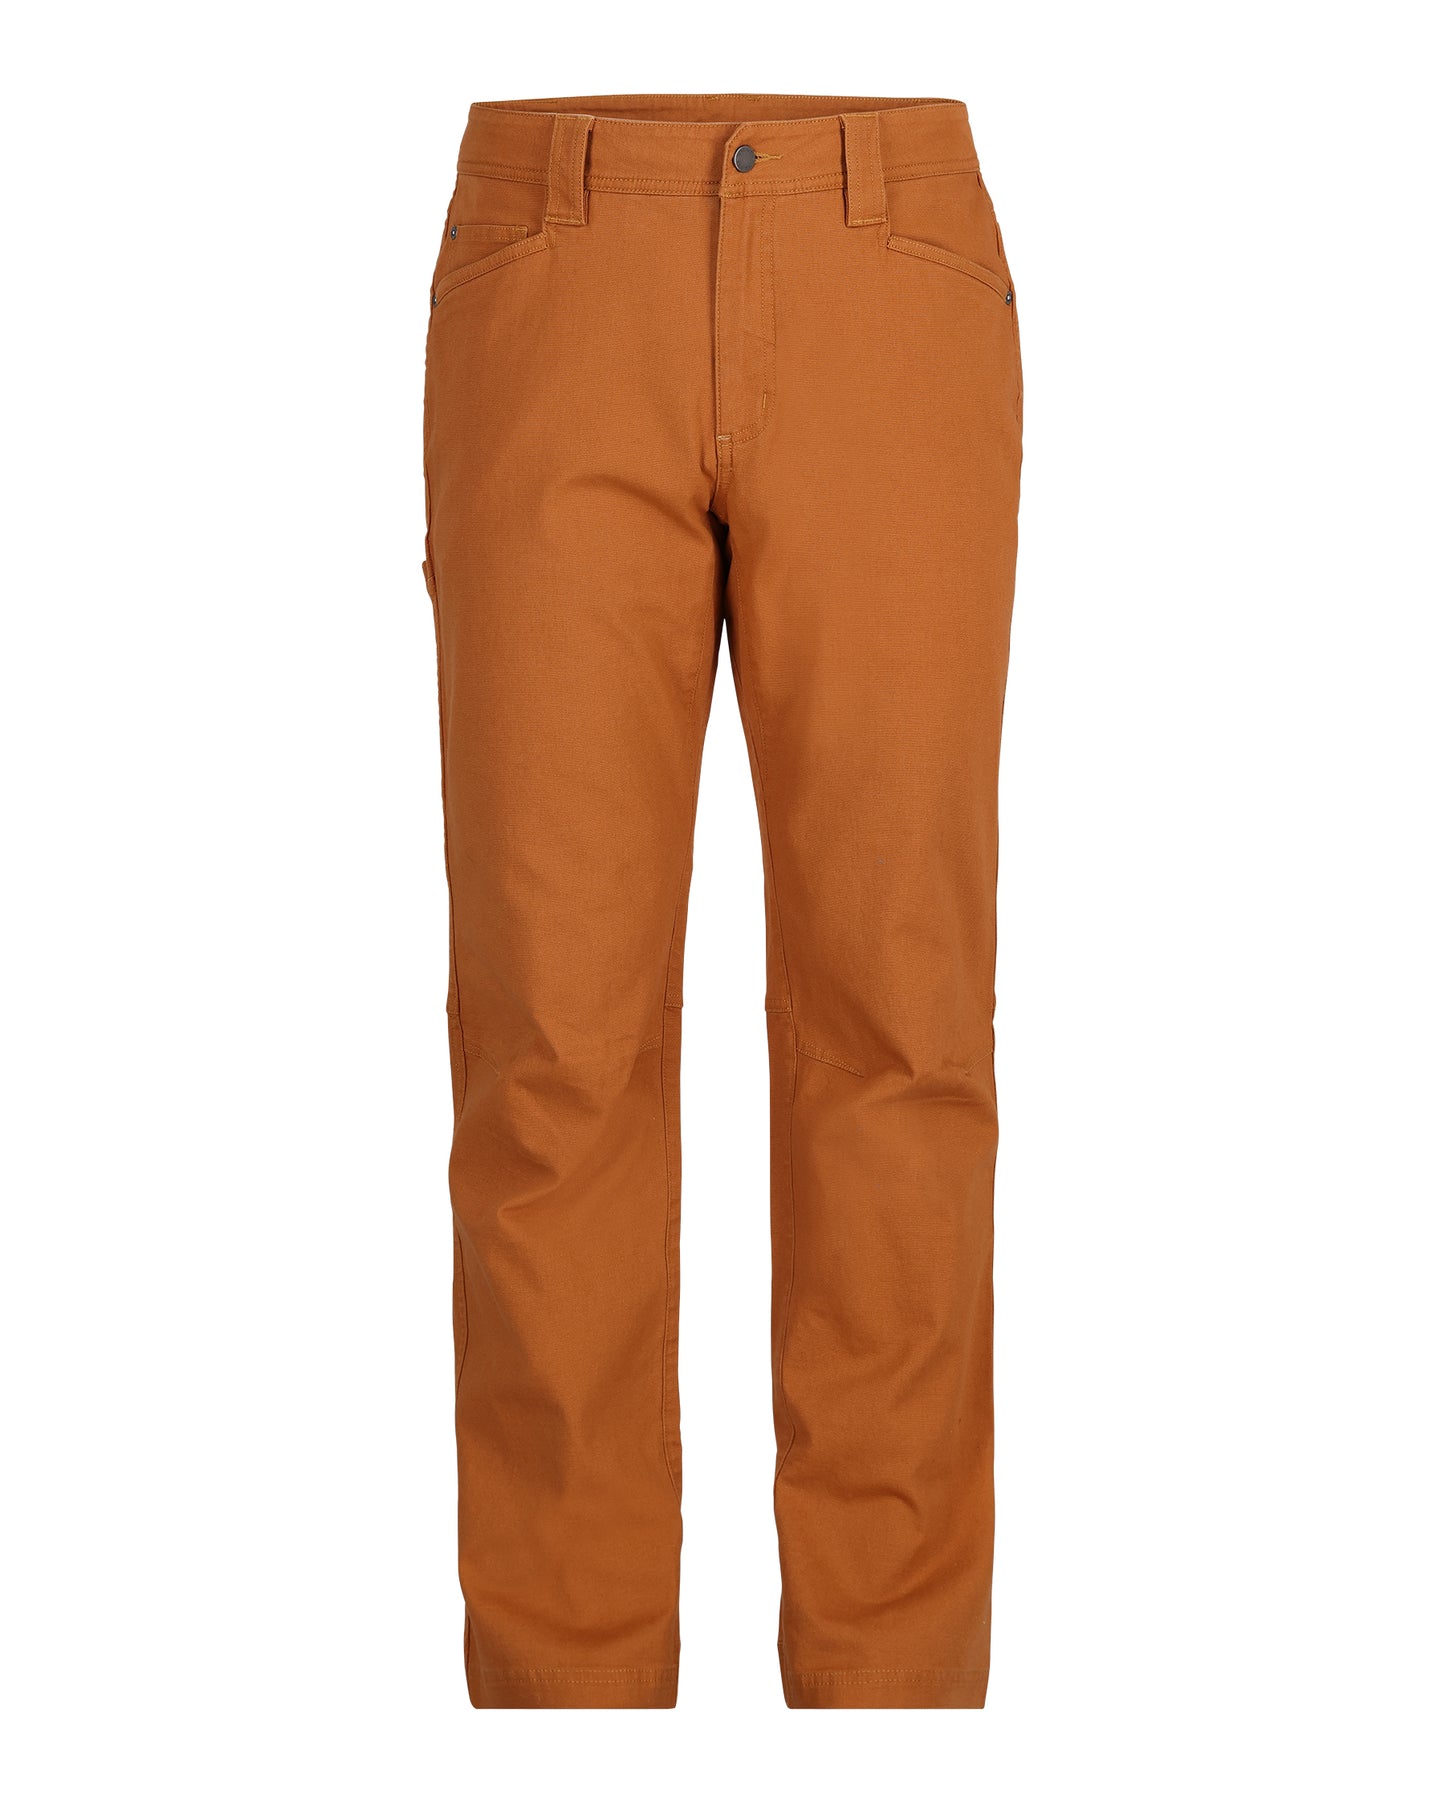 13847-224-gallatin-pant-mannequin-f23-front